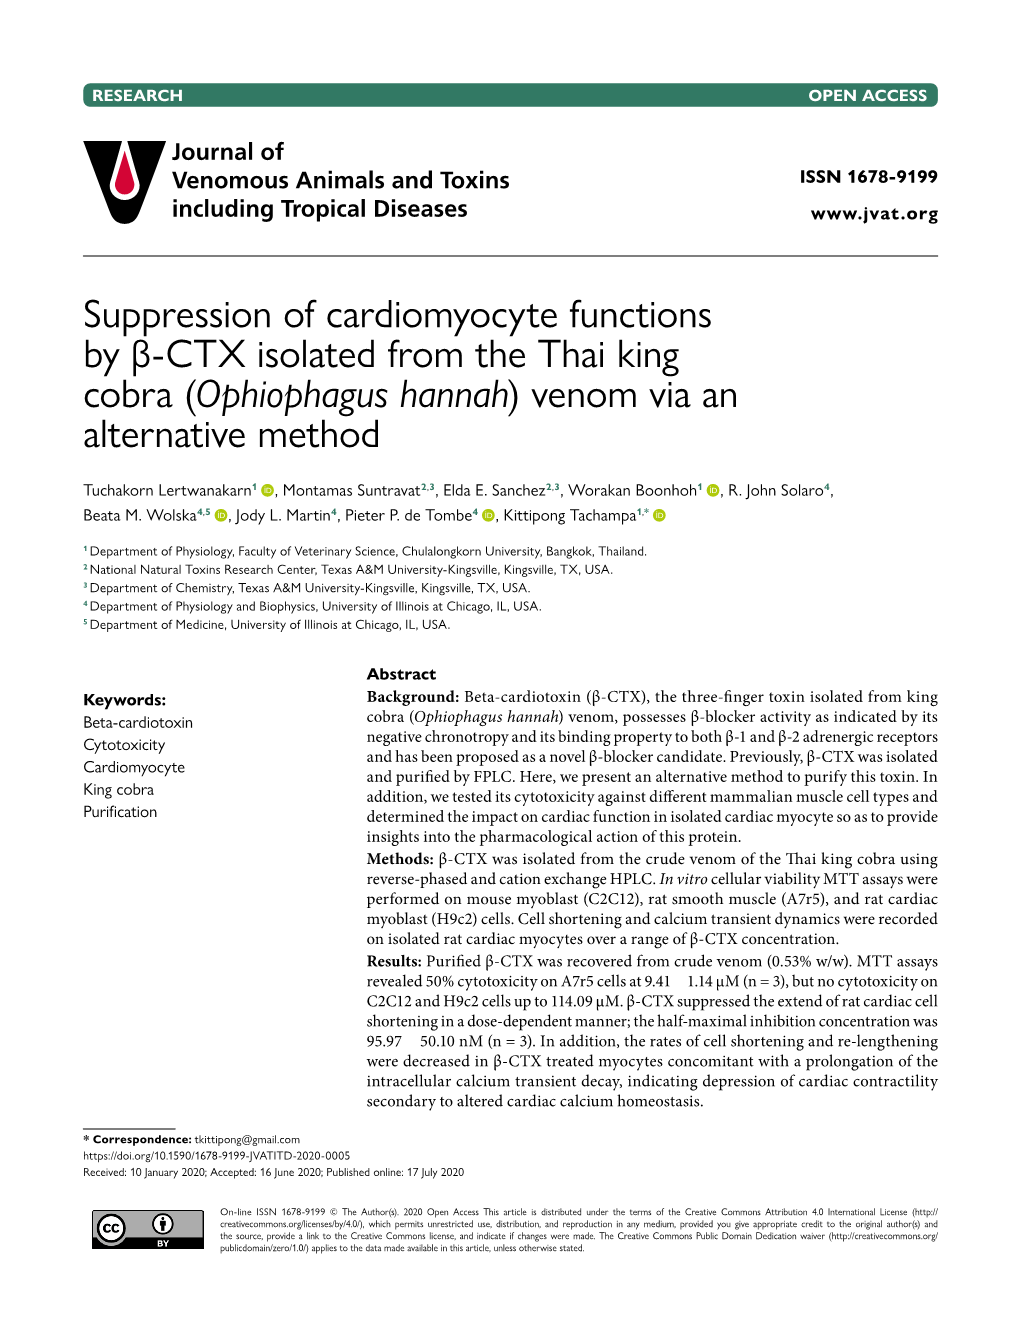 Suppression of Cardiomyocyte Functions by Β-CTX Isolated from the Thai King Cobra (Ophiophagus Hannah) Venom Via an Alternative Method